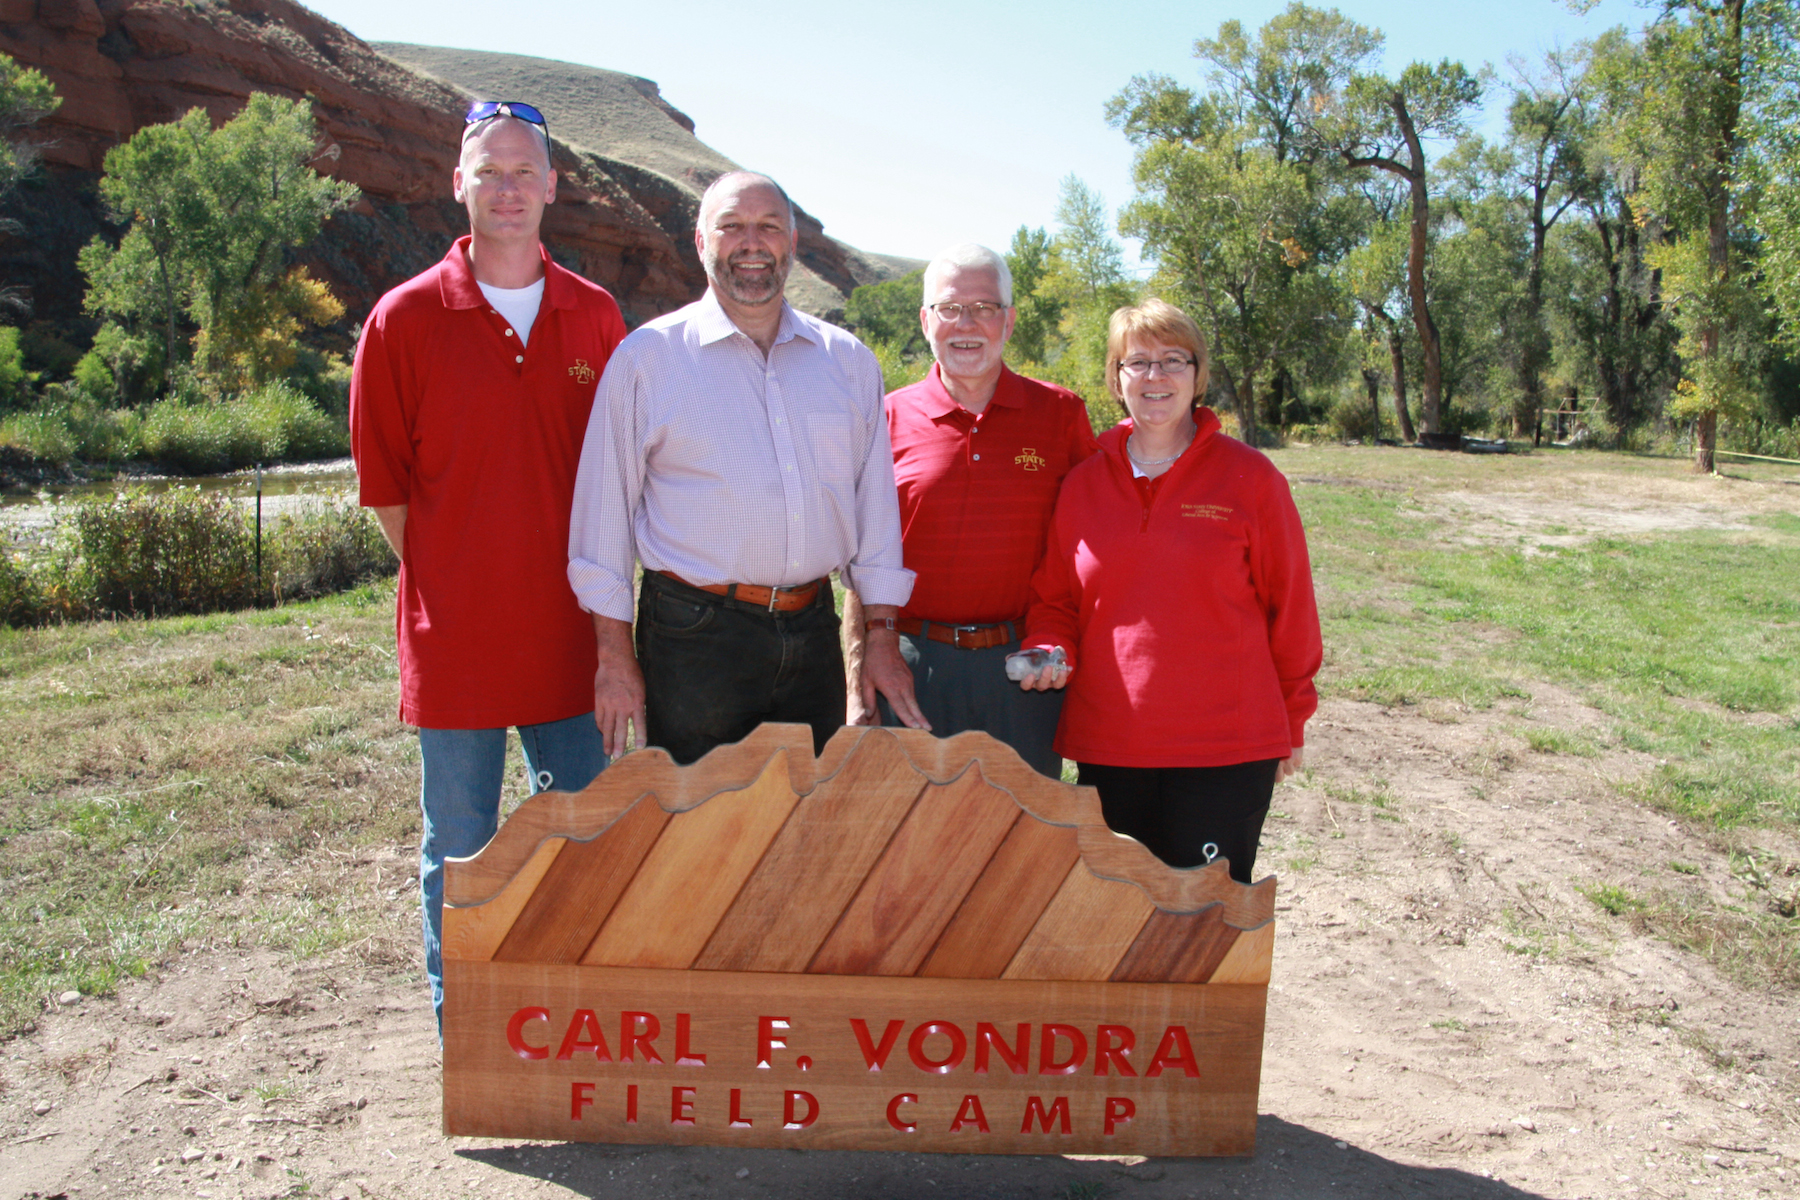 Mark Mathison, President Steven Leath, Department Chair Bill Simpkins, and LAS Dean Beate Schmittmann stand outside in front of a sign for Carl F. Vondra Field Camp. Trees and rocky cliffs are behind them.